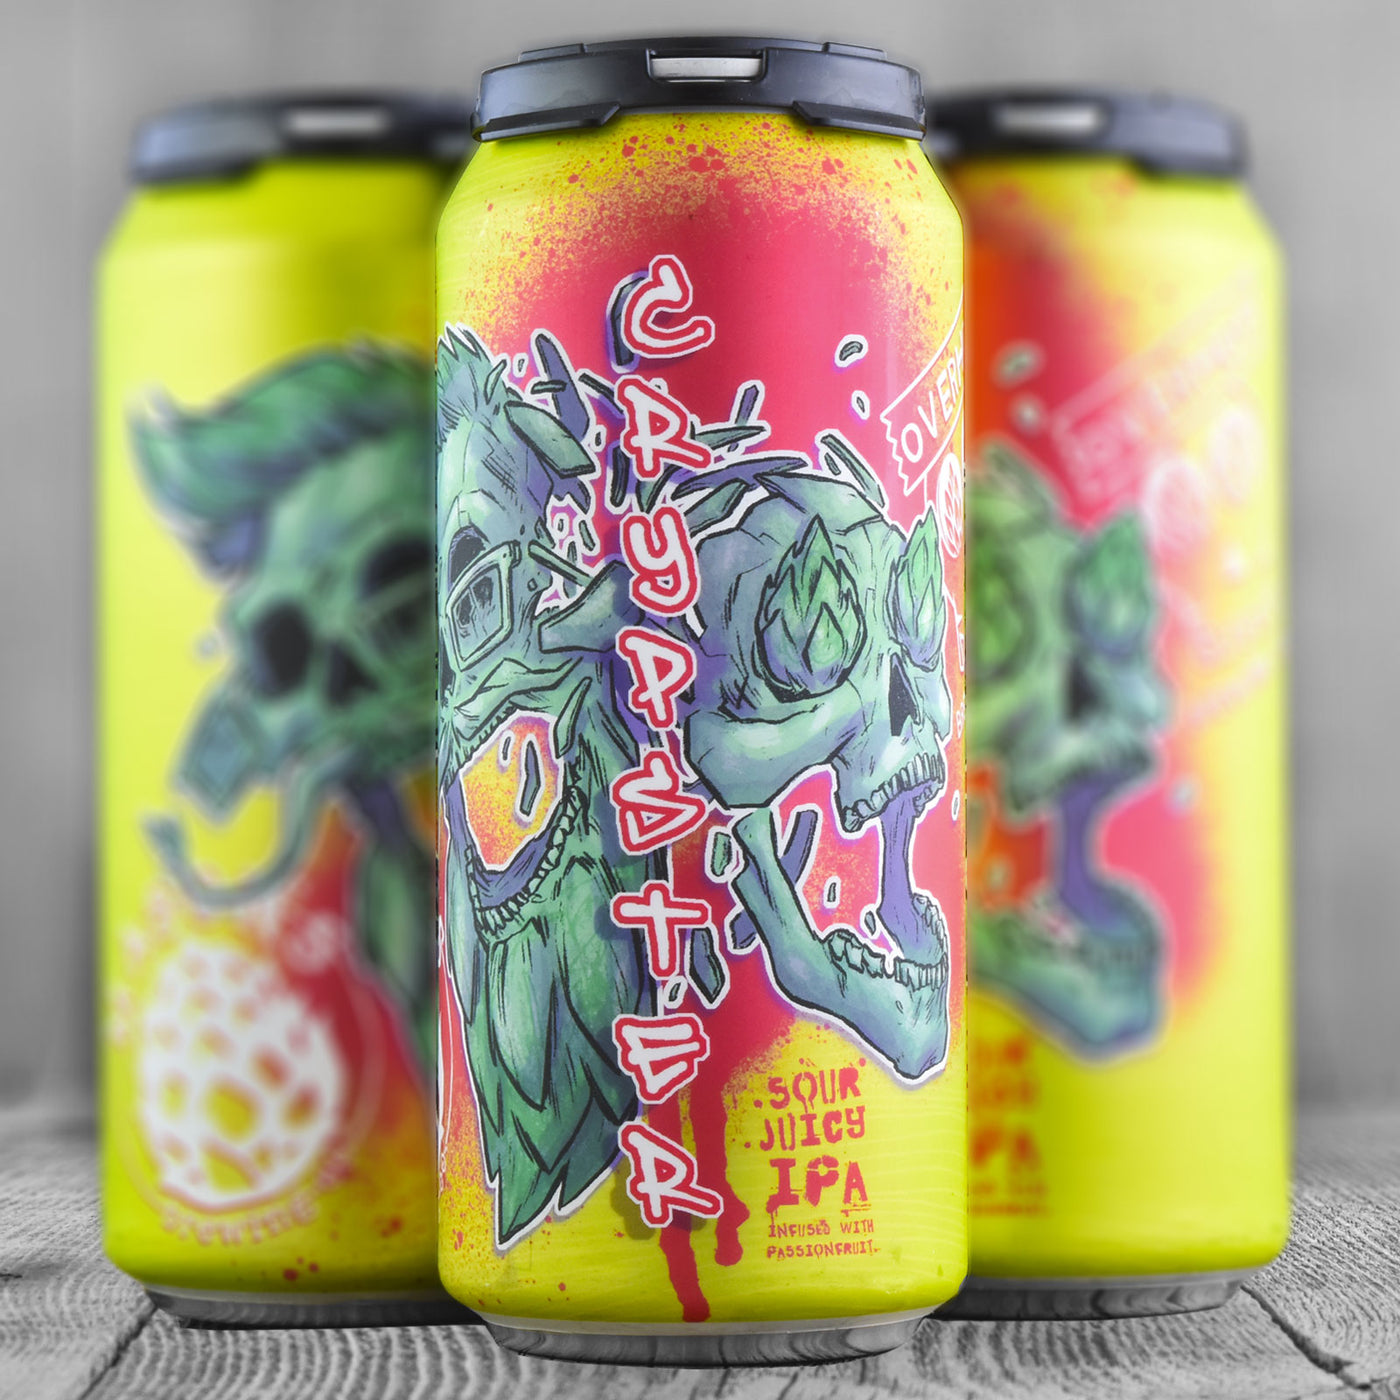 Mason's Brewing Crypster Sour IPA